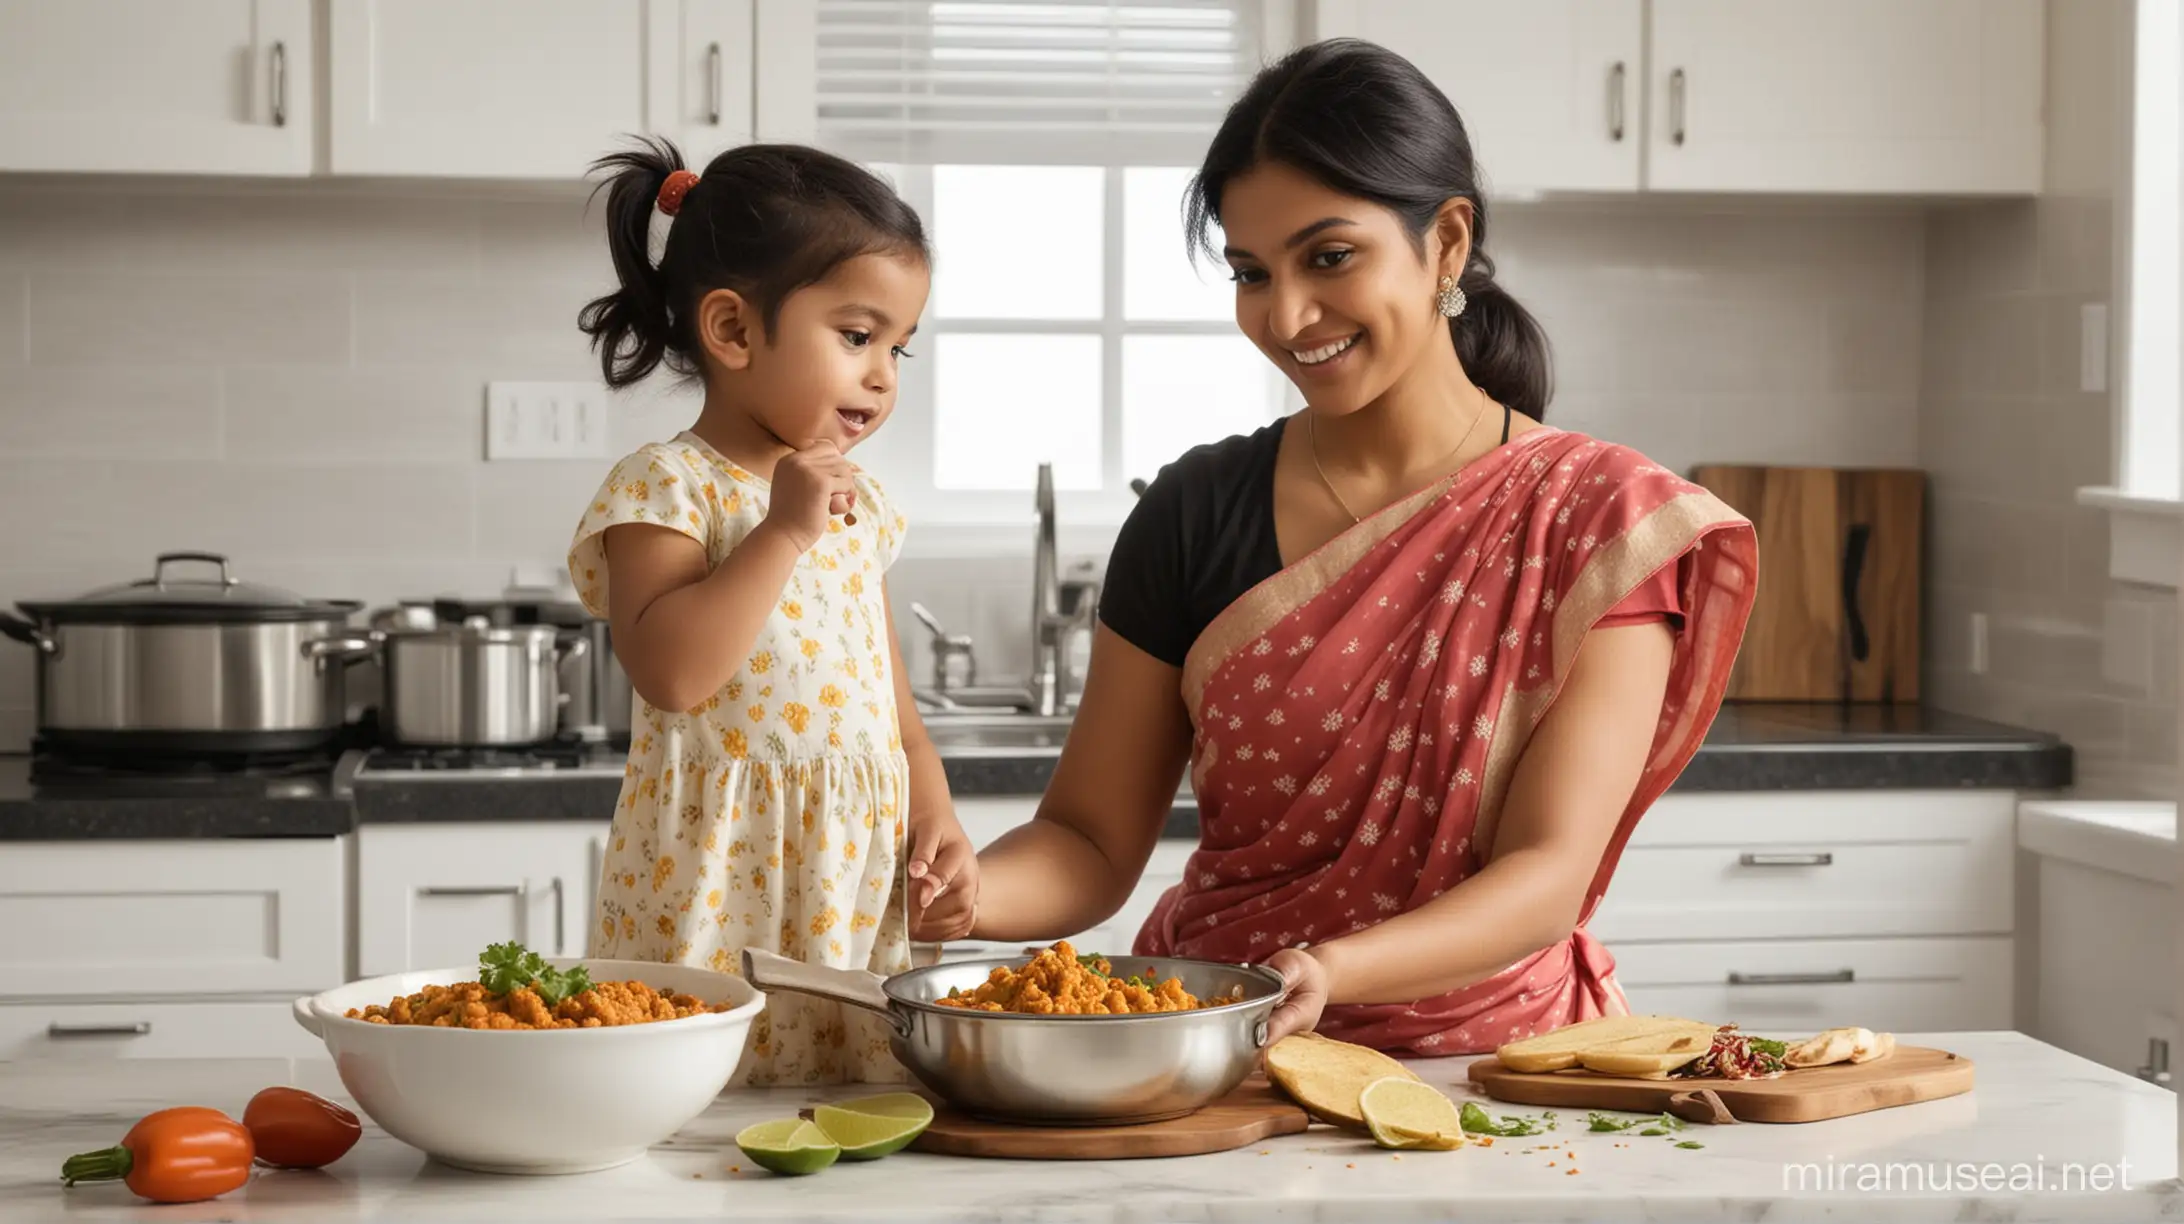 Create an image of Indian woman in her 20s, making Indian food in American kitchen, along with her 3 year old girl. 